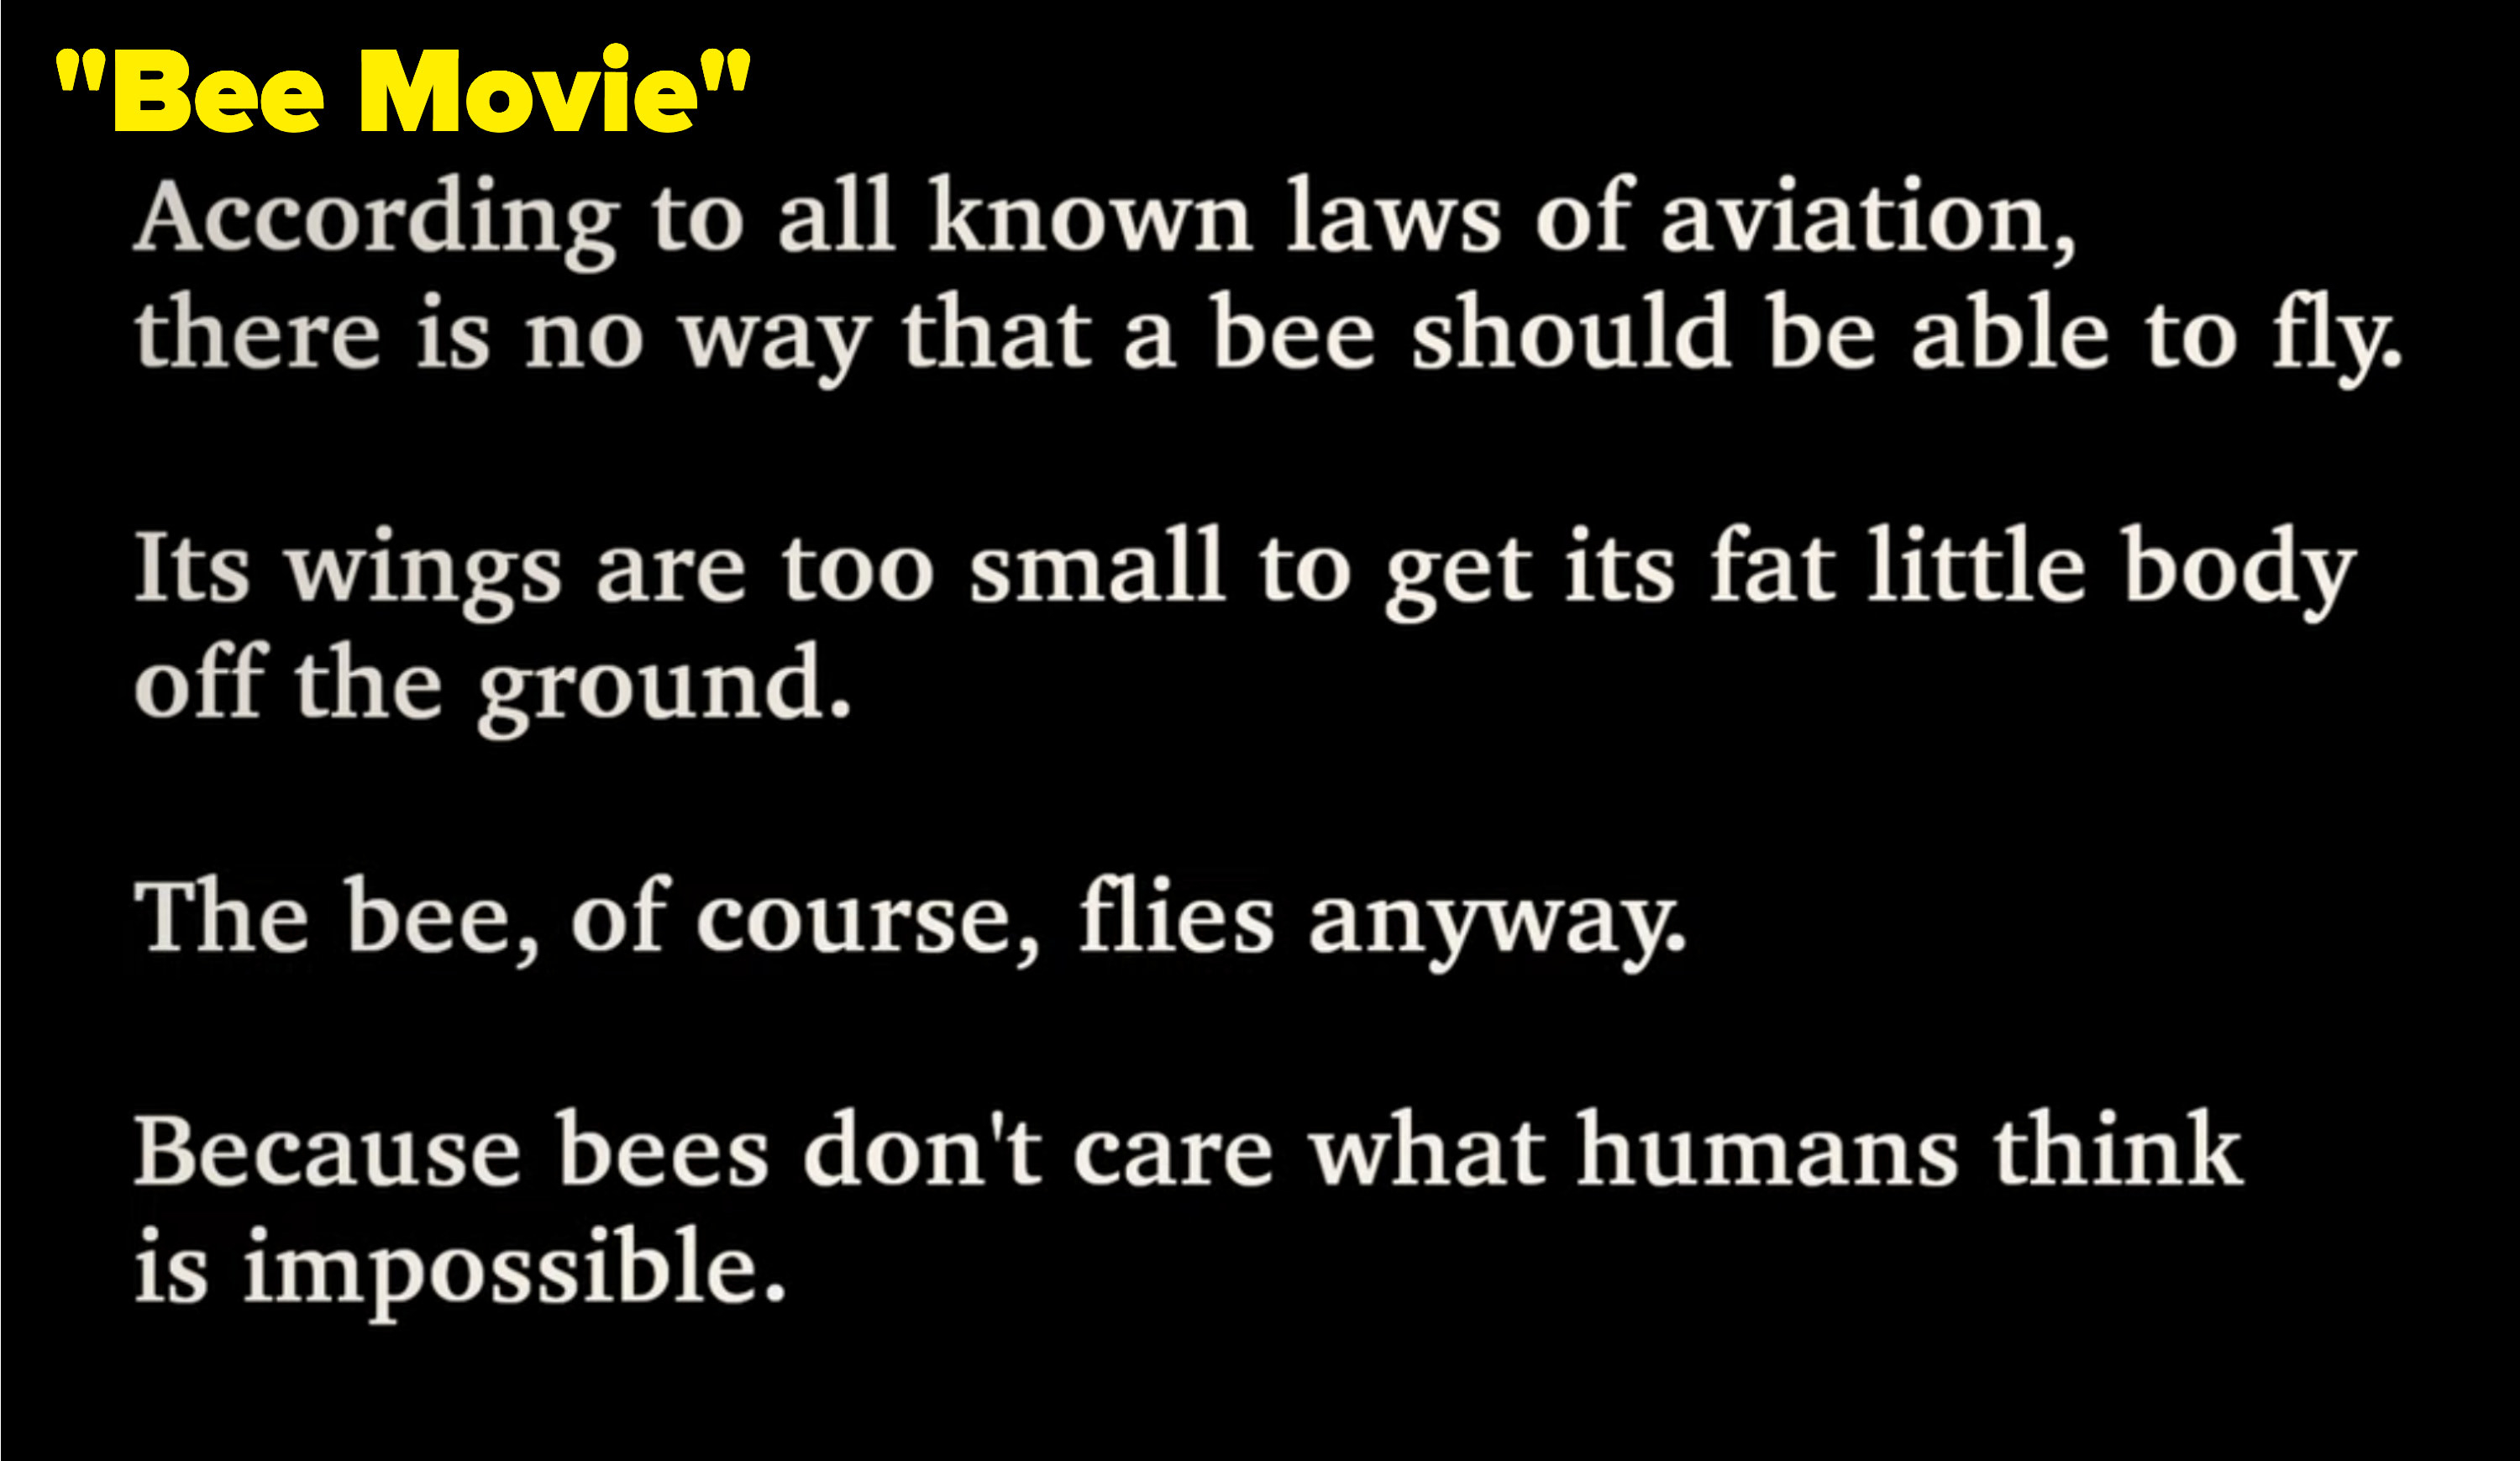 Bee Movie opening titles saying that according to laws of aviation, there is no way a bee should be able to fly, but it flies anyways